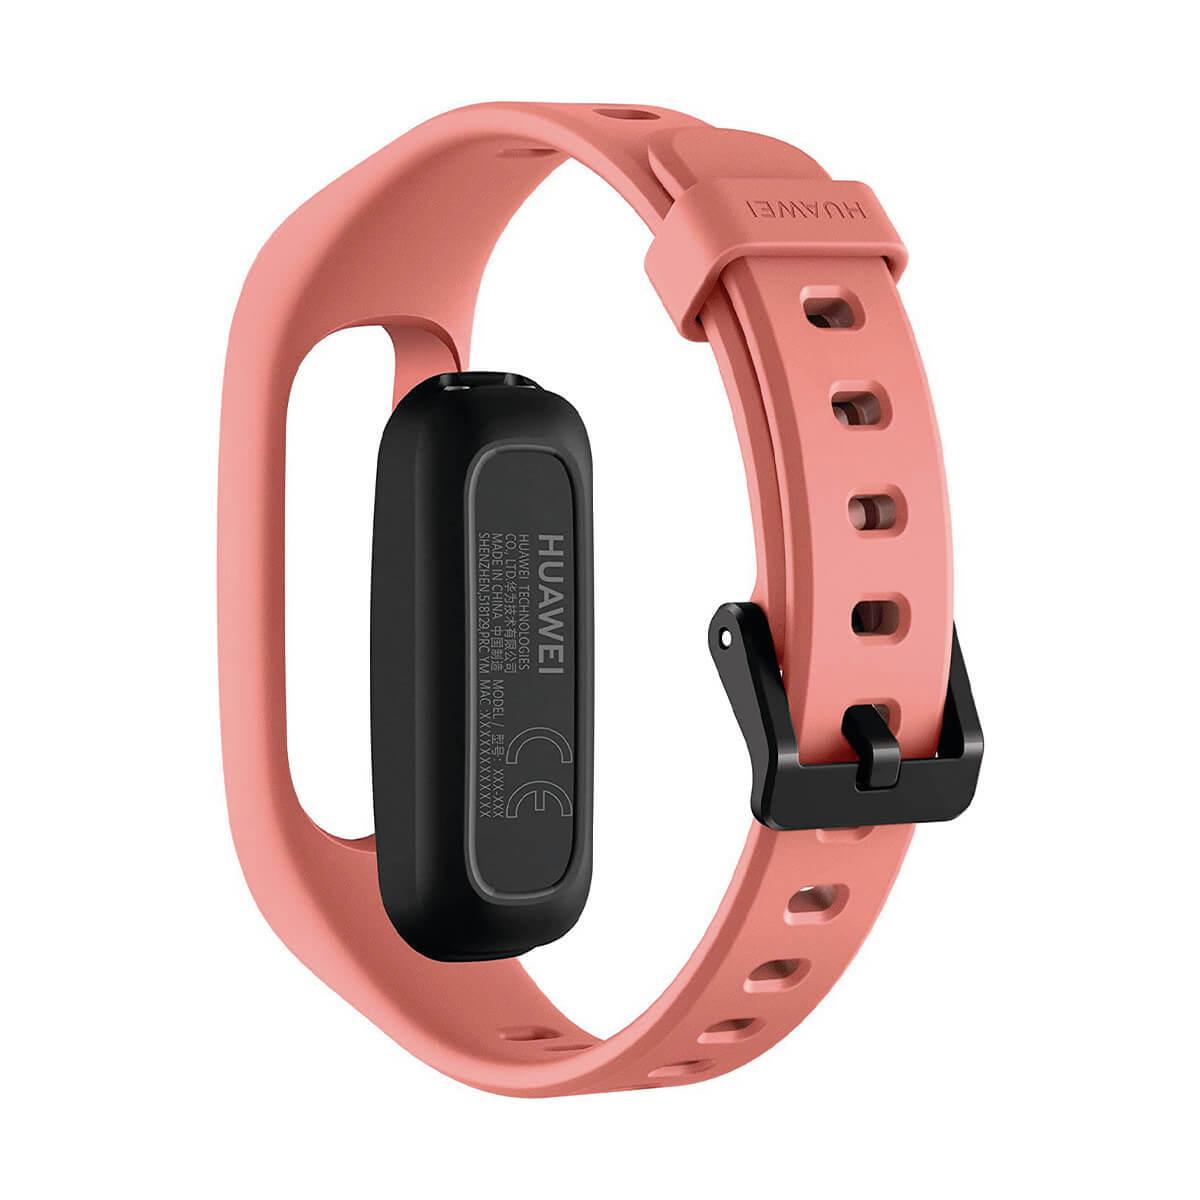 Red Fitness Tracker, BAND 4E HUAWEI ACTIVE Mineral 55025929 uni, AW70-B49 MINERAL RED,